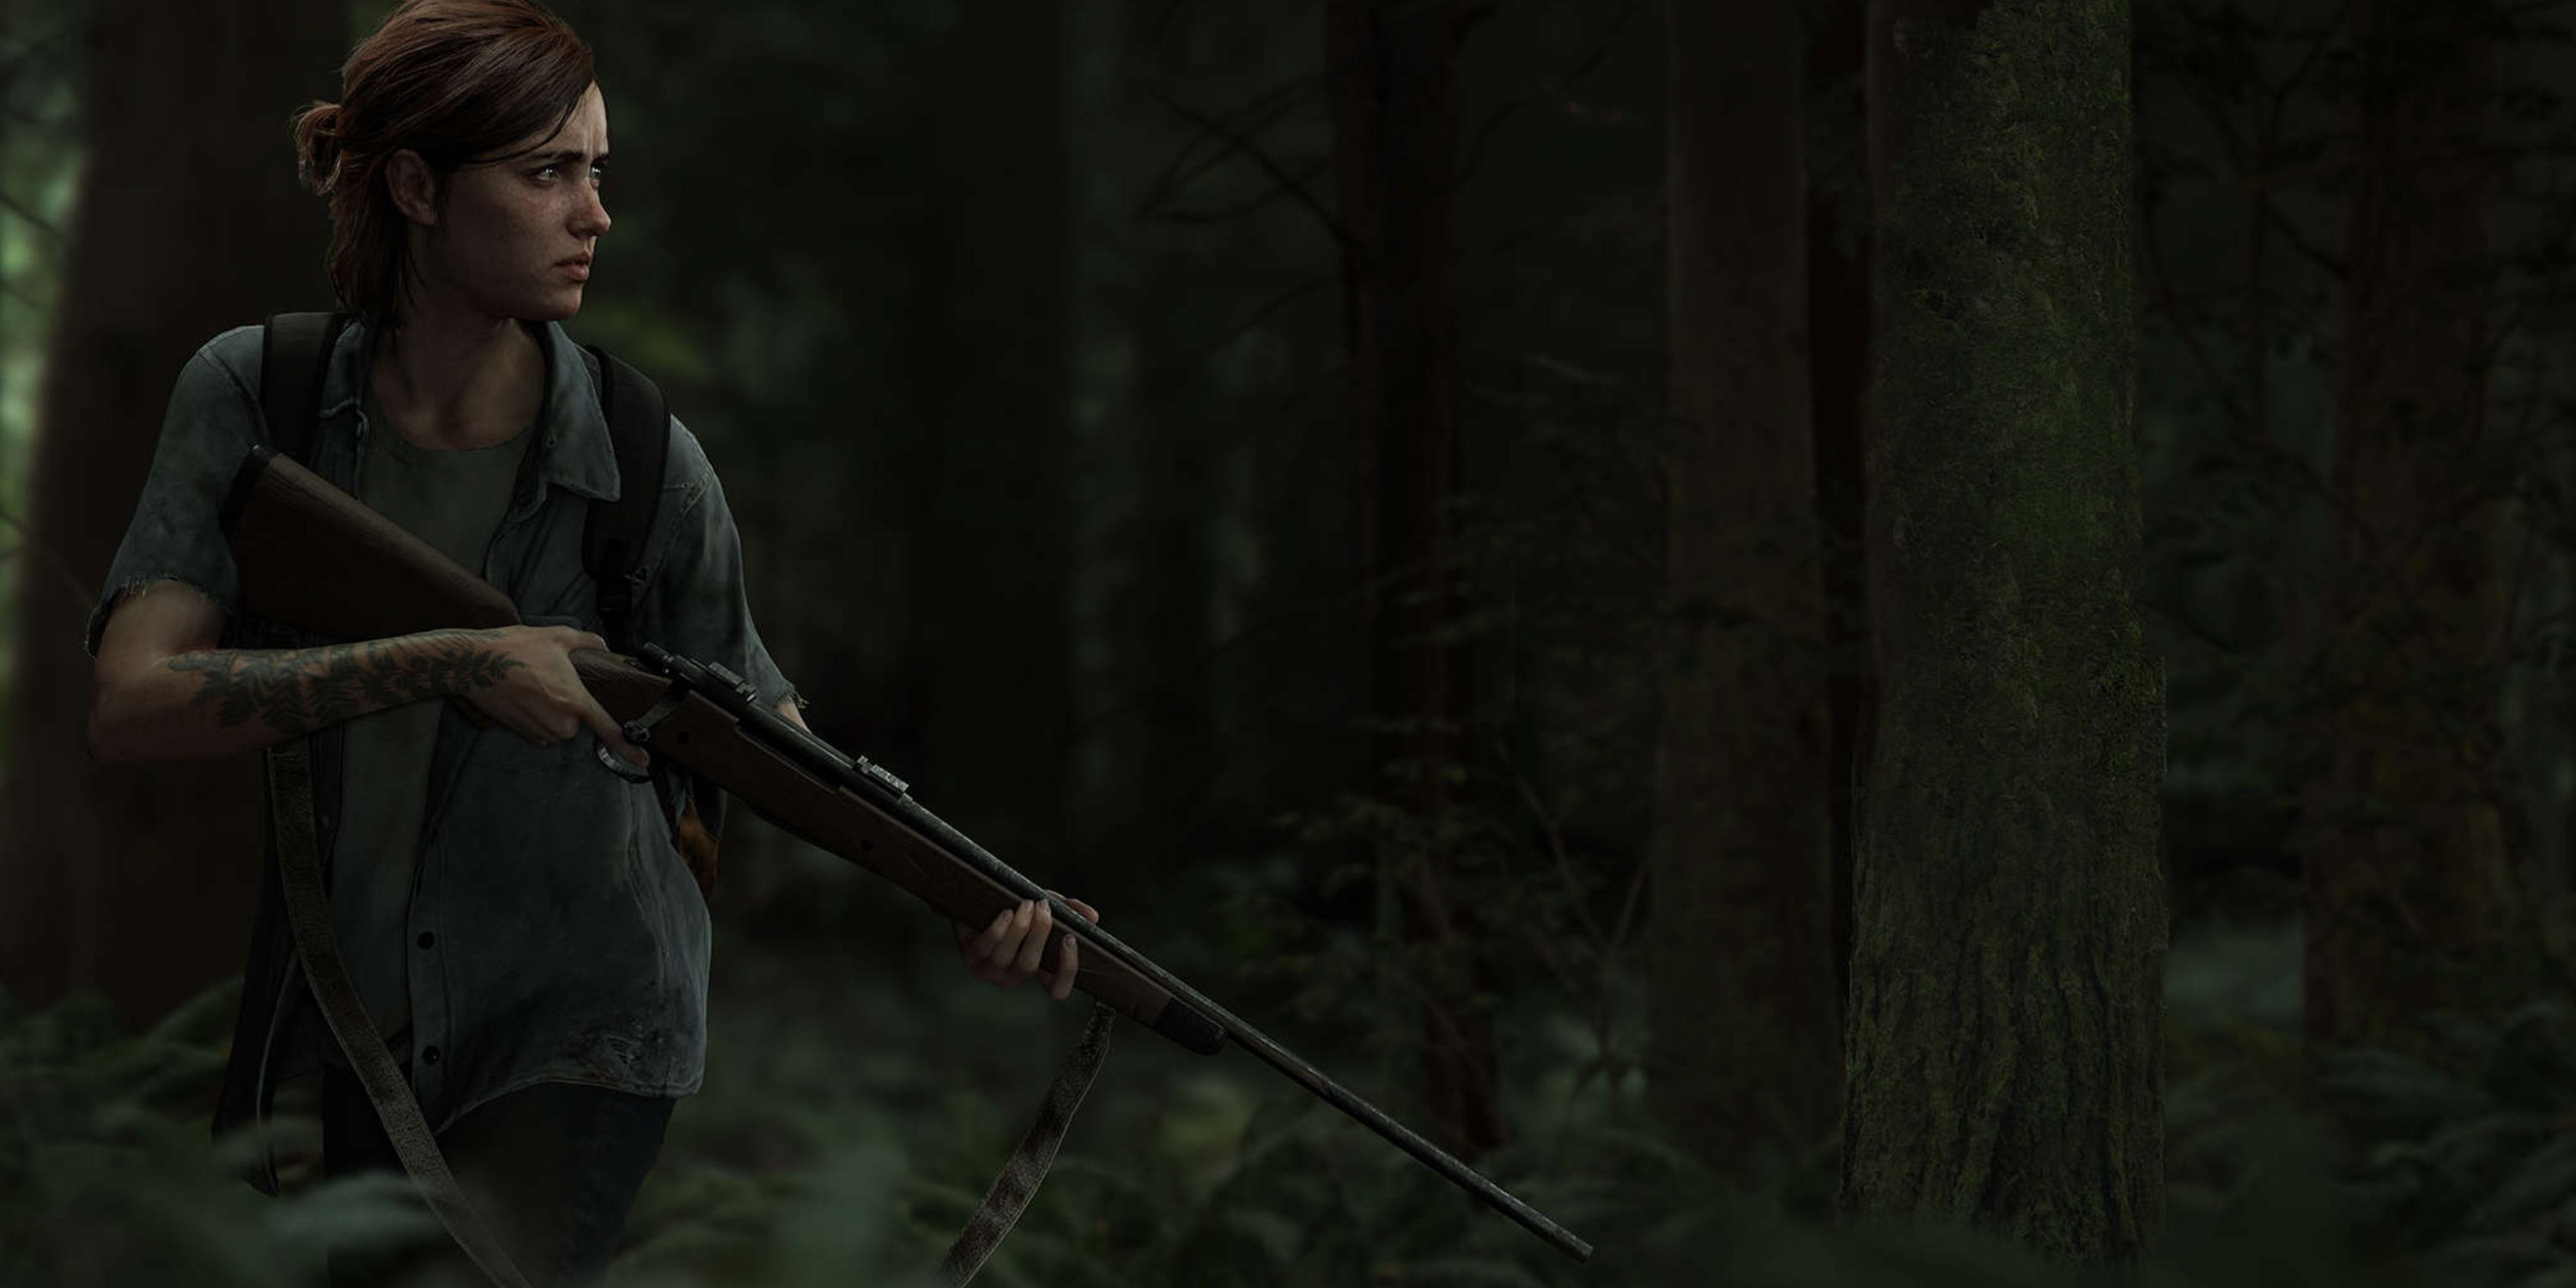 Eliie stalking through the woods with a weapon drawn